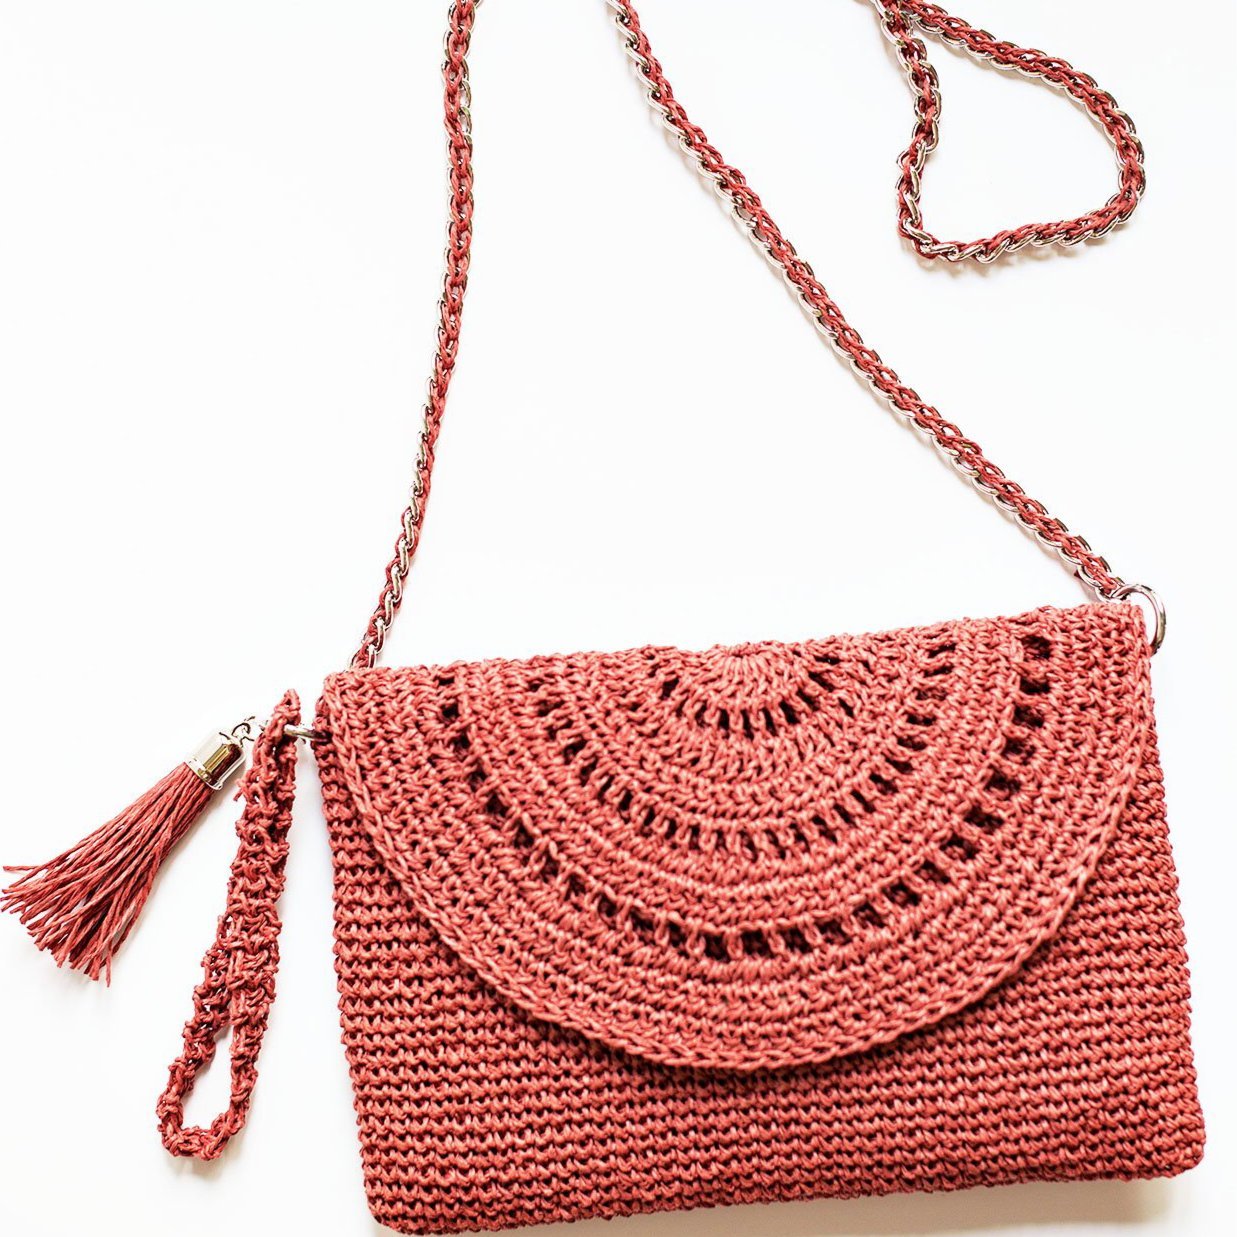 Grace Bag hand crocheted with sustainable paper yarn - Peach - SJW BAGS LONDON